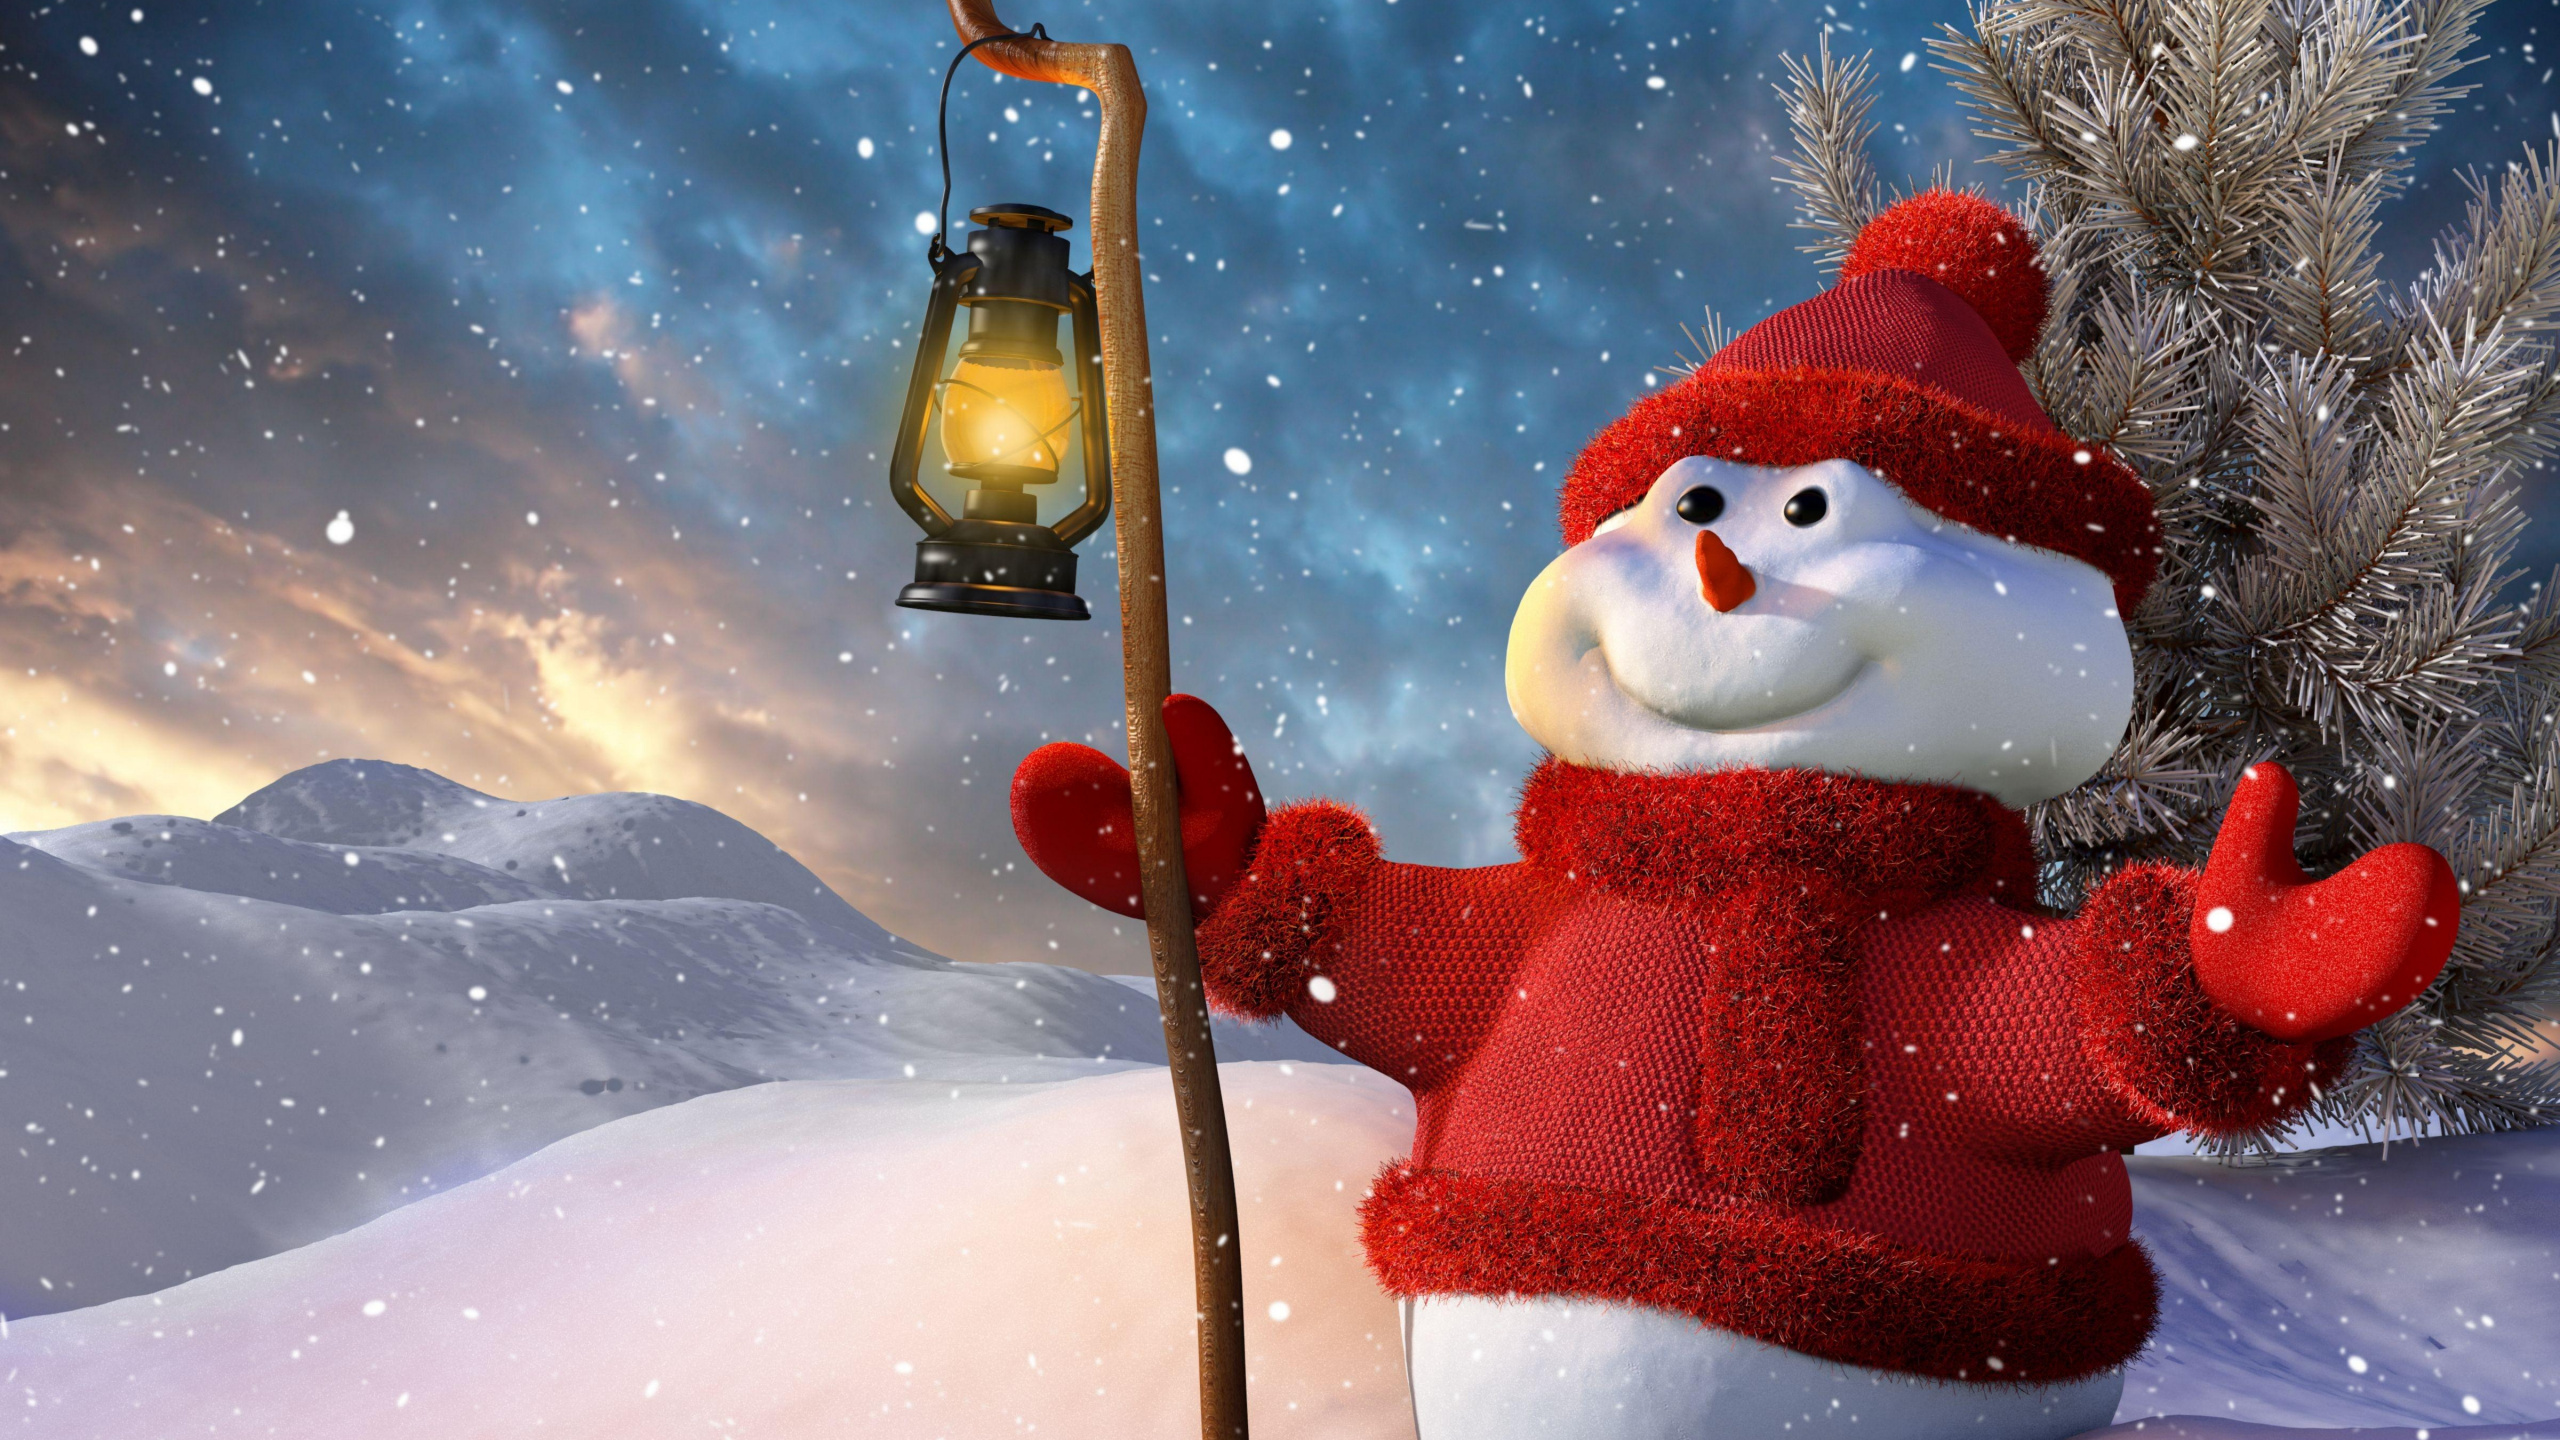 Snowman, Christmas, Space, Freezing, Christmas Tree. Wallpaper in 2560x1440 Resolution